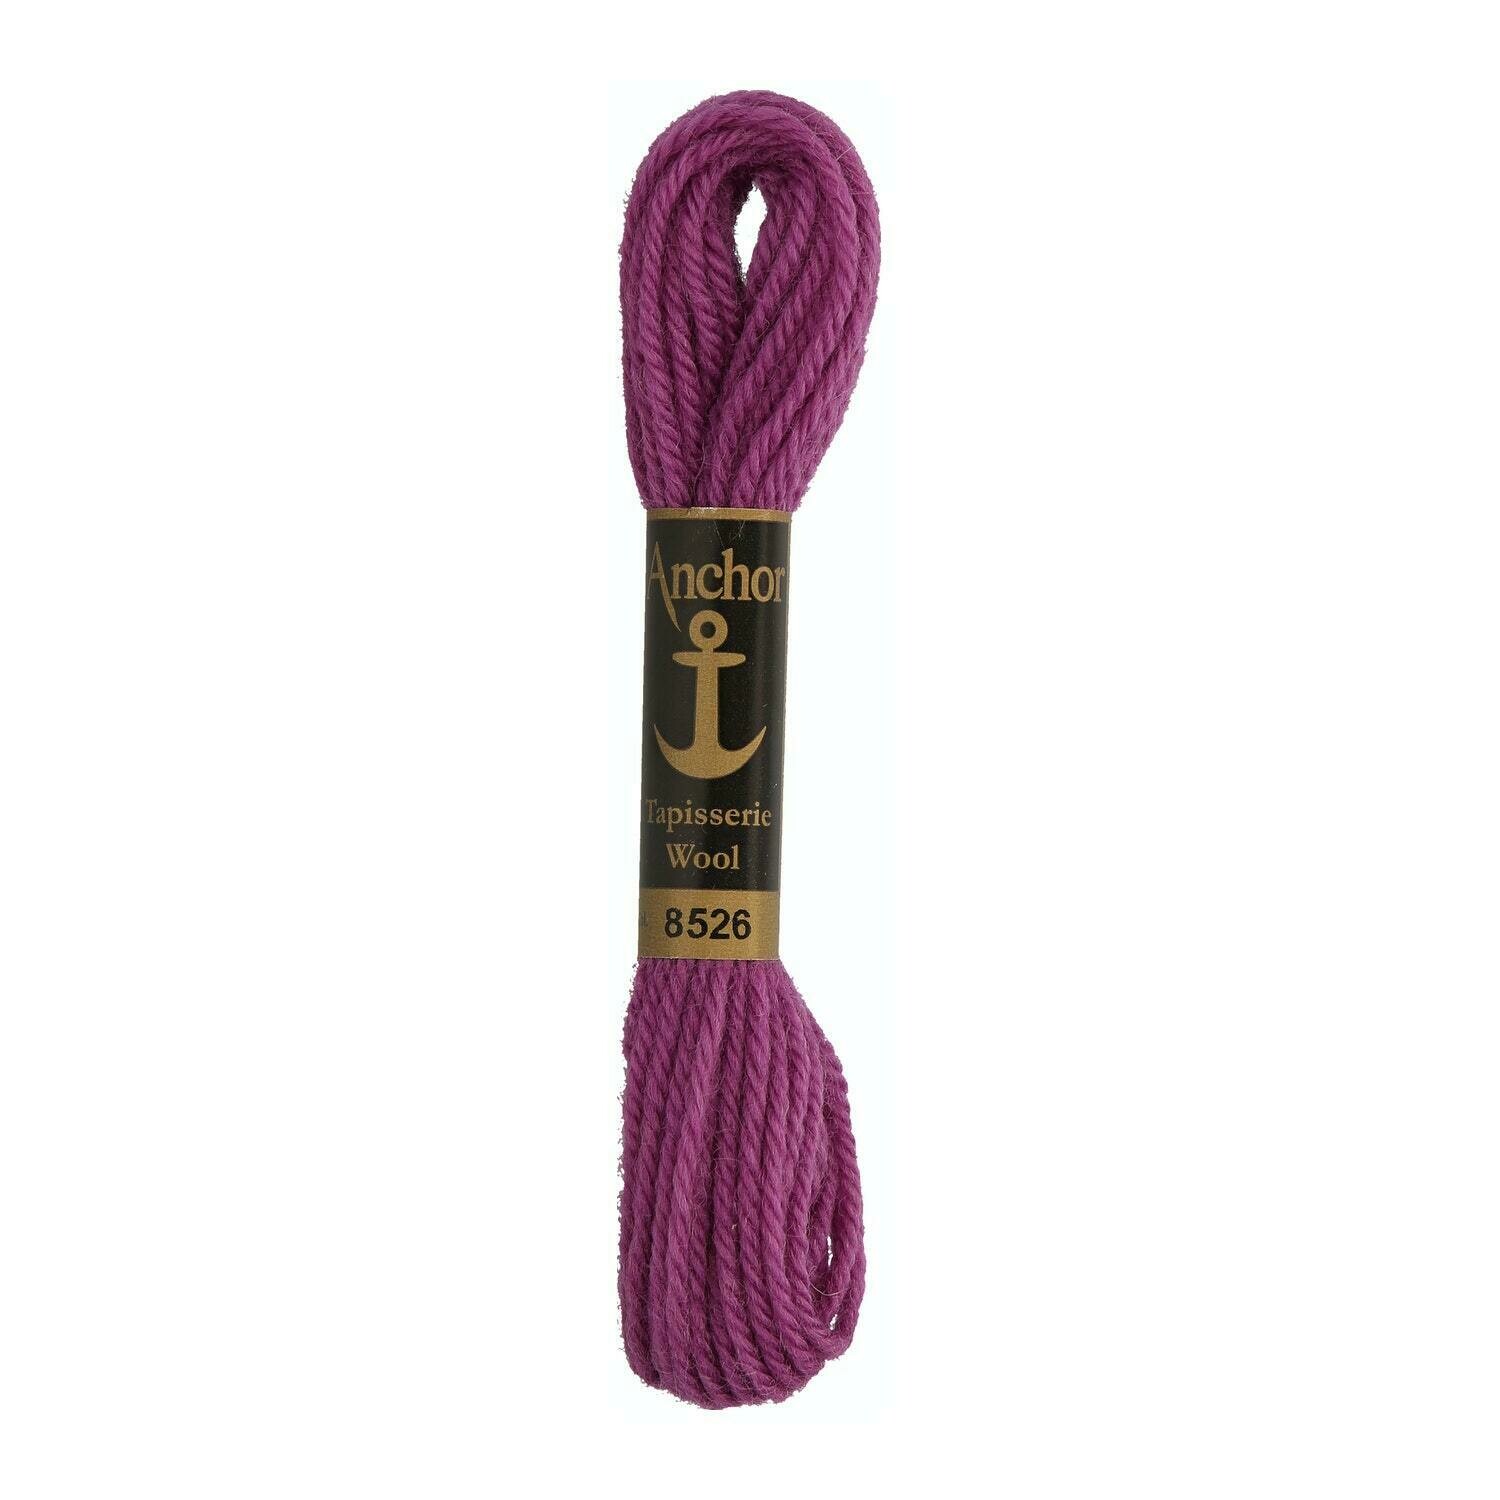 Anchor Tapisserie Wool #08526